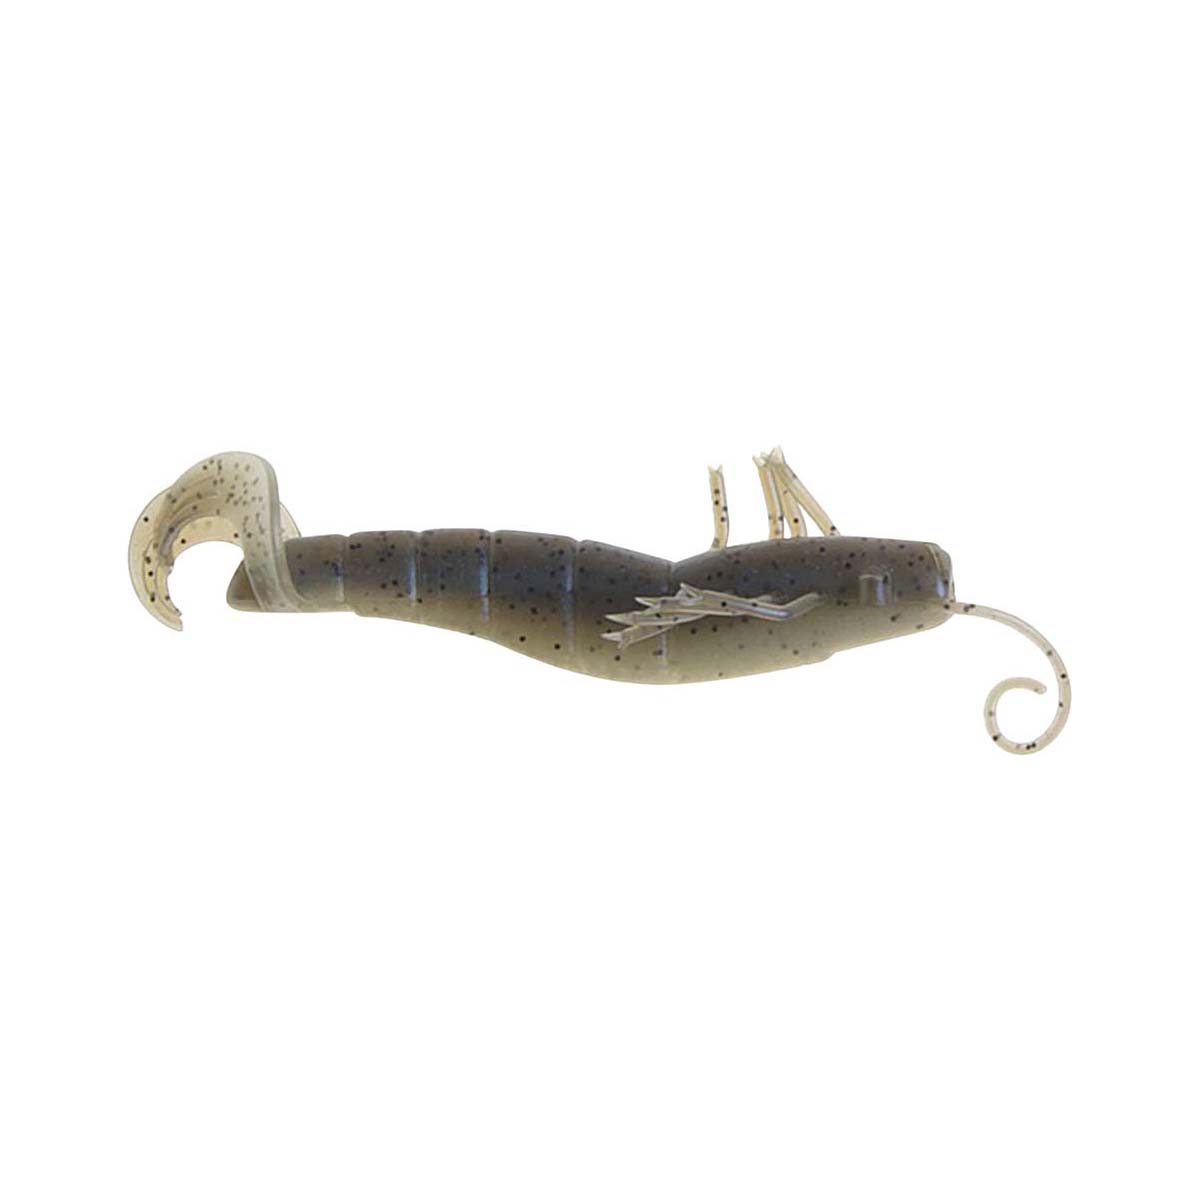 Atomic Plazos Prong Soft Plastic Lure 4in Grey Ghost